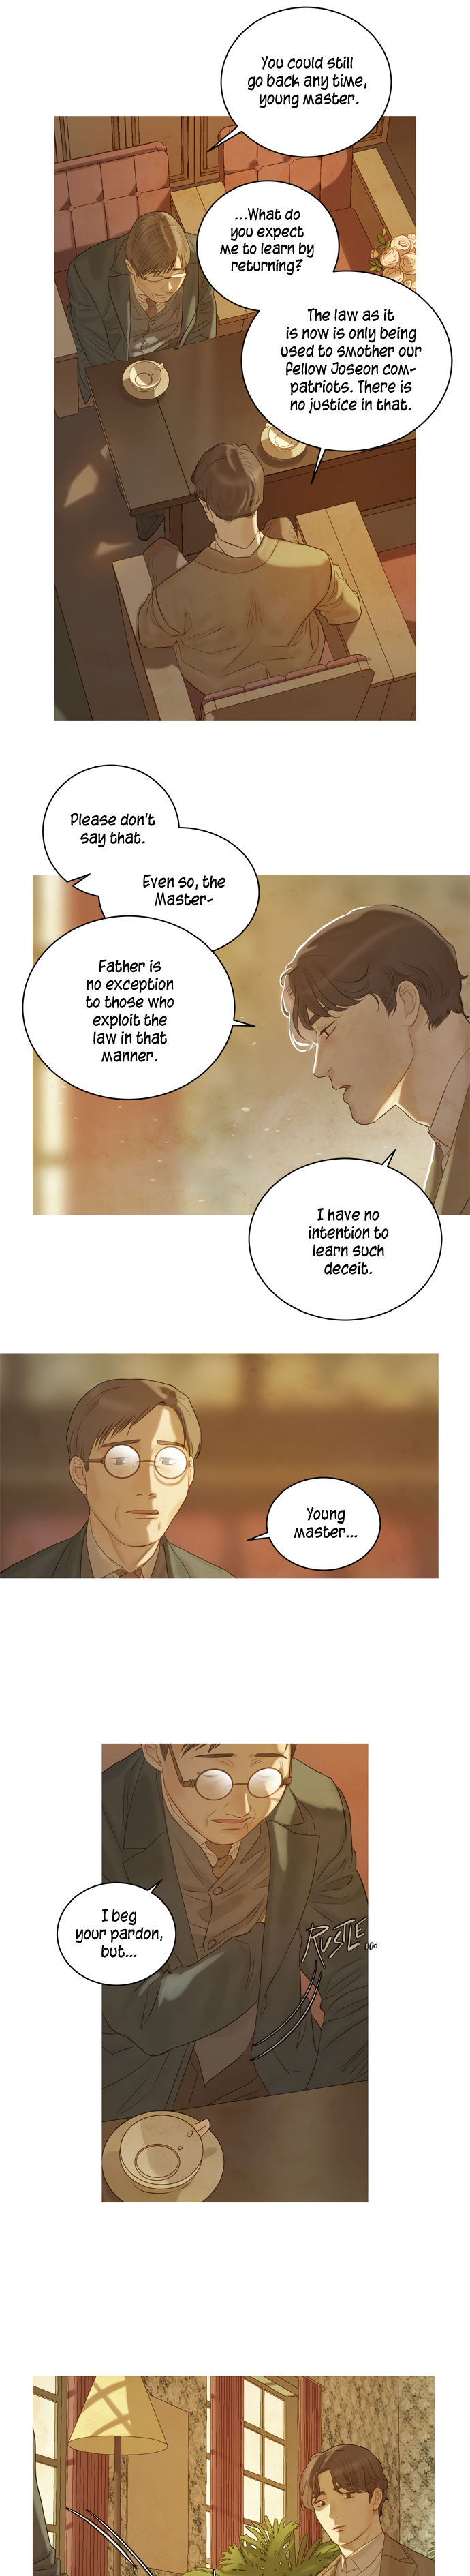 Gorae Byul - The Gyeongseong Mermaid - Chapter 17 Page 6